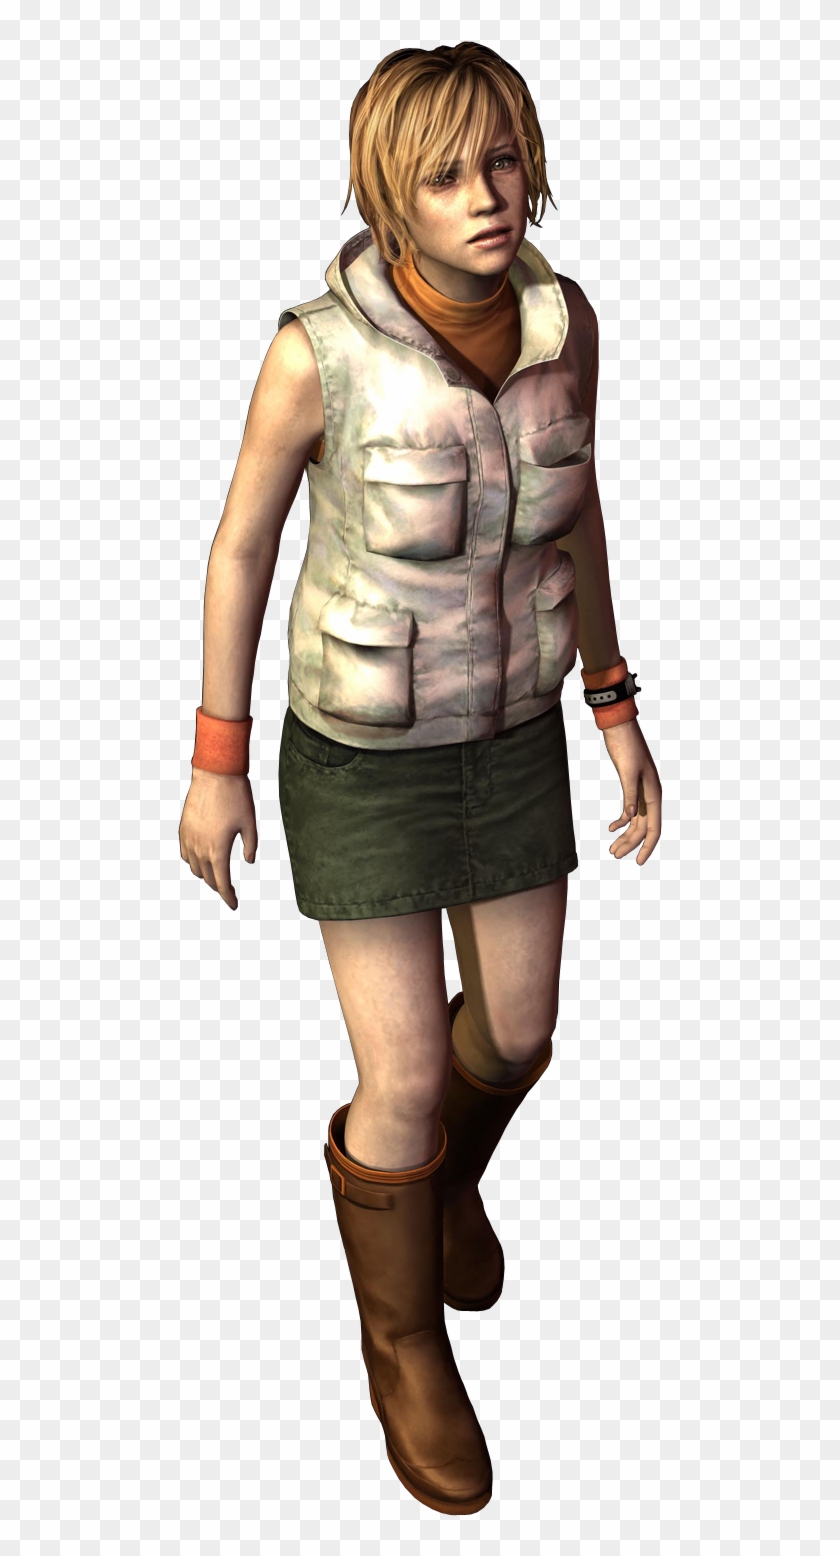 Silent Hill Render Download - Silent Hill 3 Png Clipart #1995725